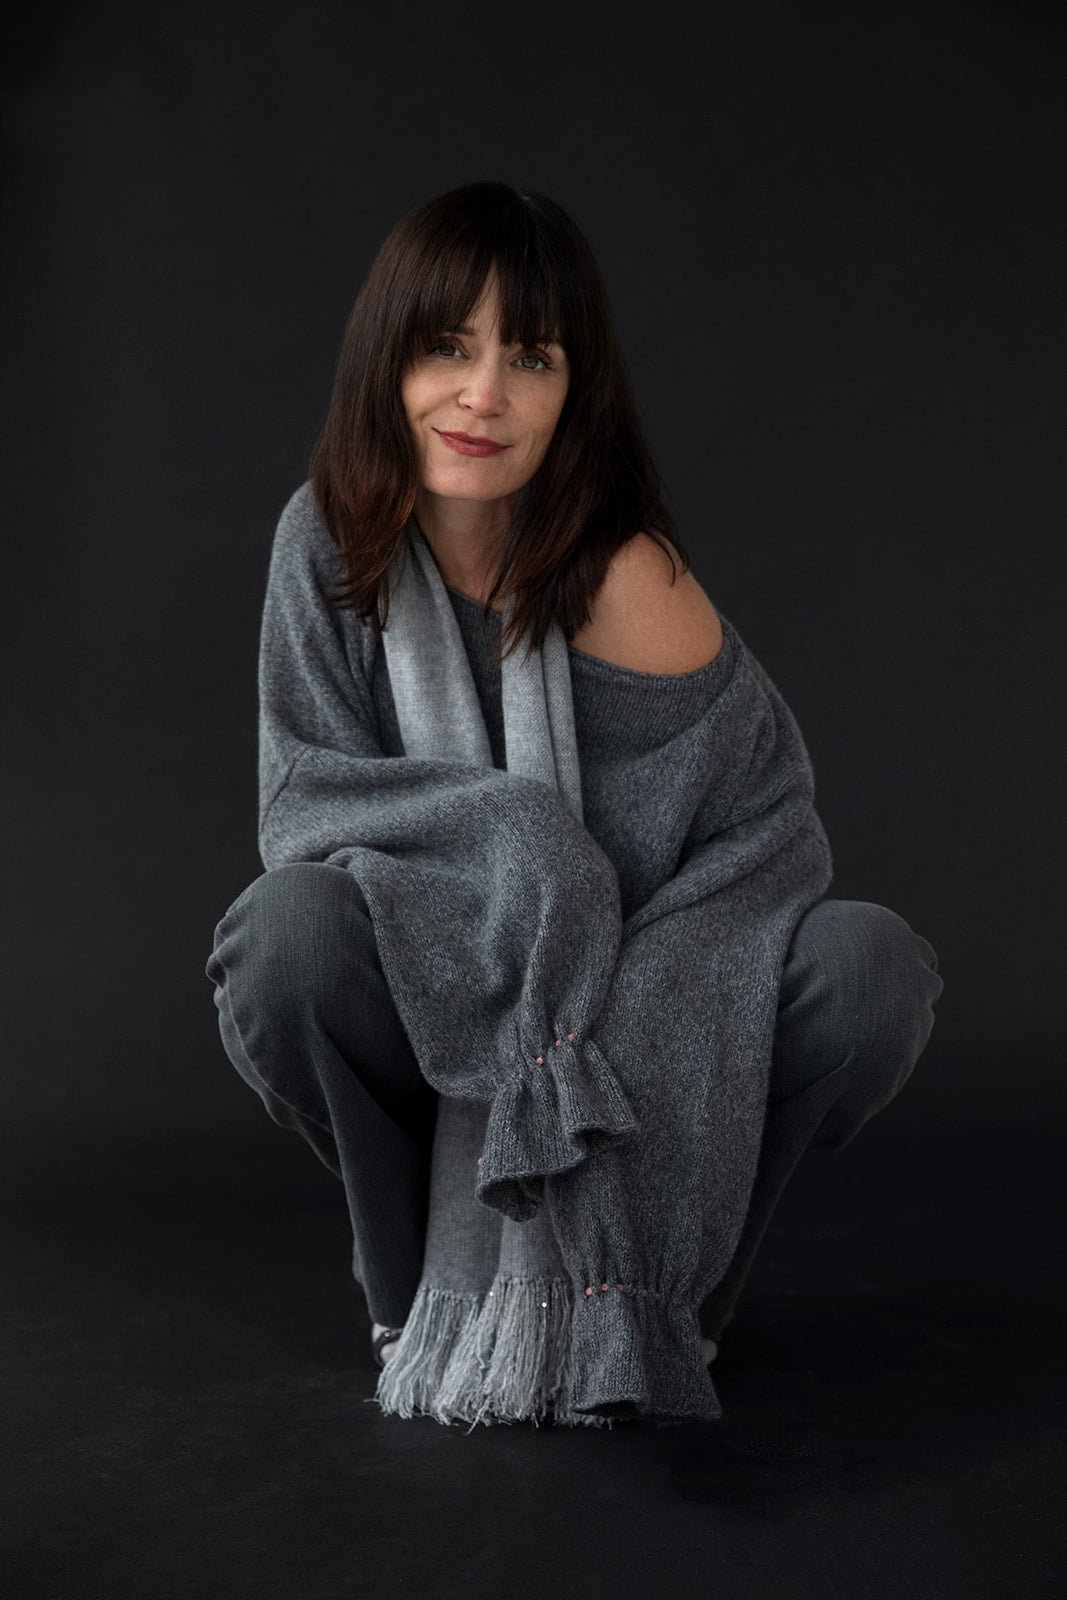 Who doesn't want to be wrapped in cashmere?